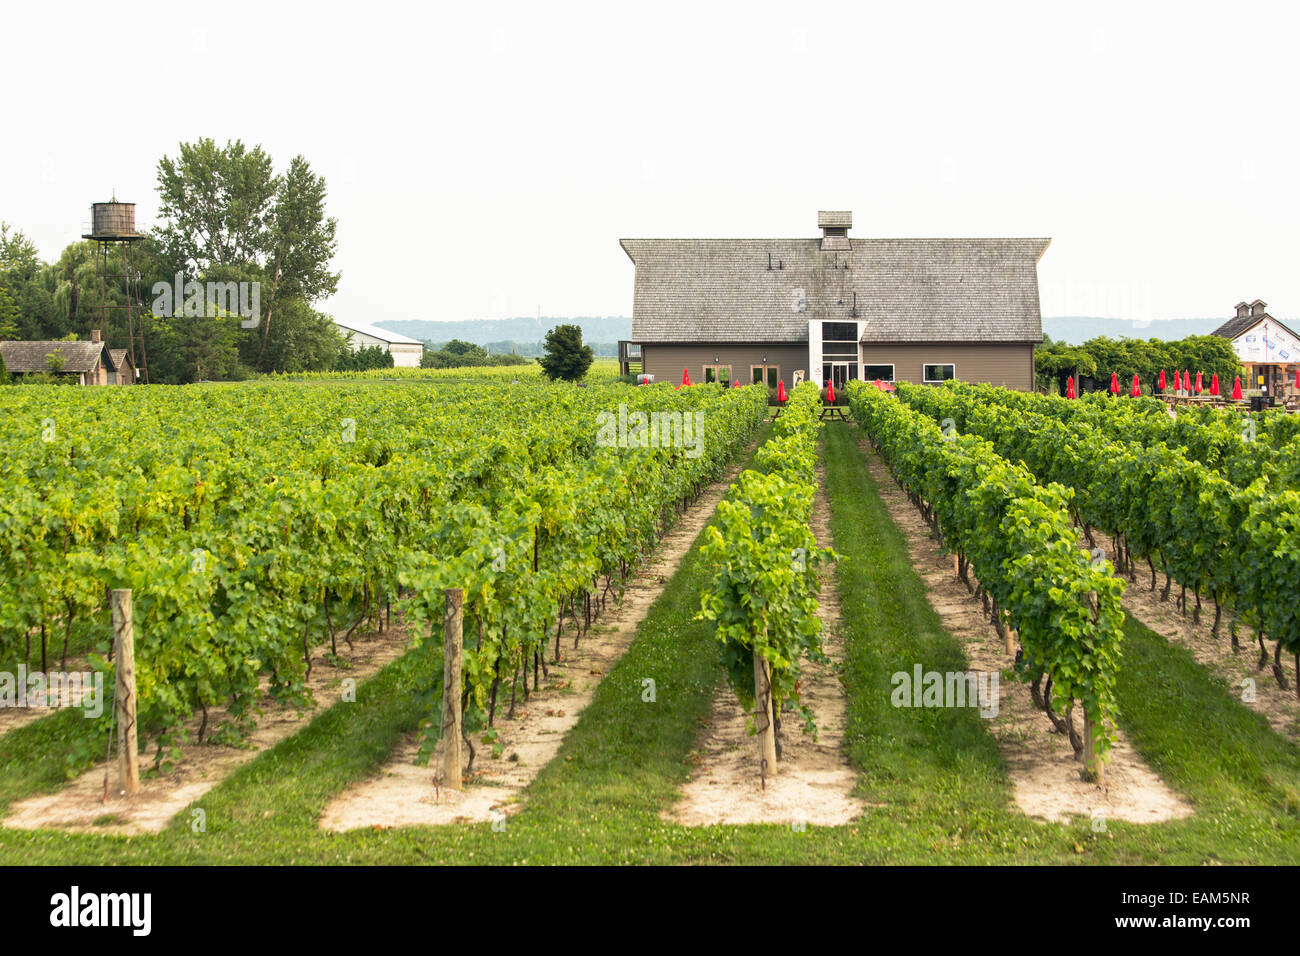 Canada, Ontario, Niagara-on-the-Lake, Inniskillin Winery, rows of grapevines in a vineyard with a winery building Stock Photo